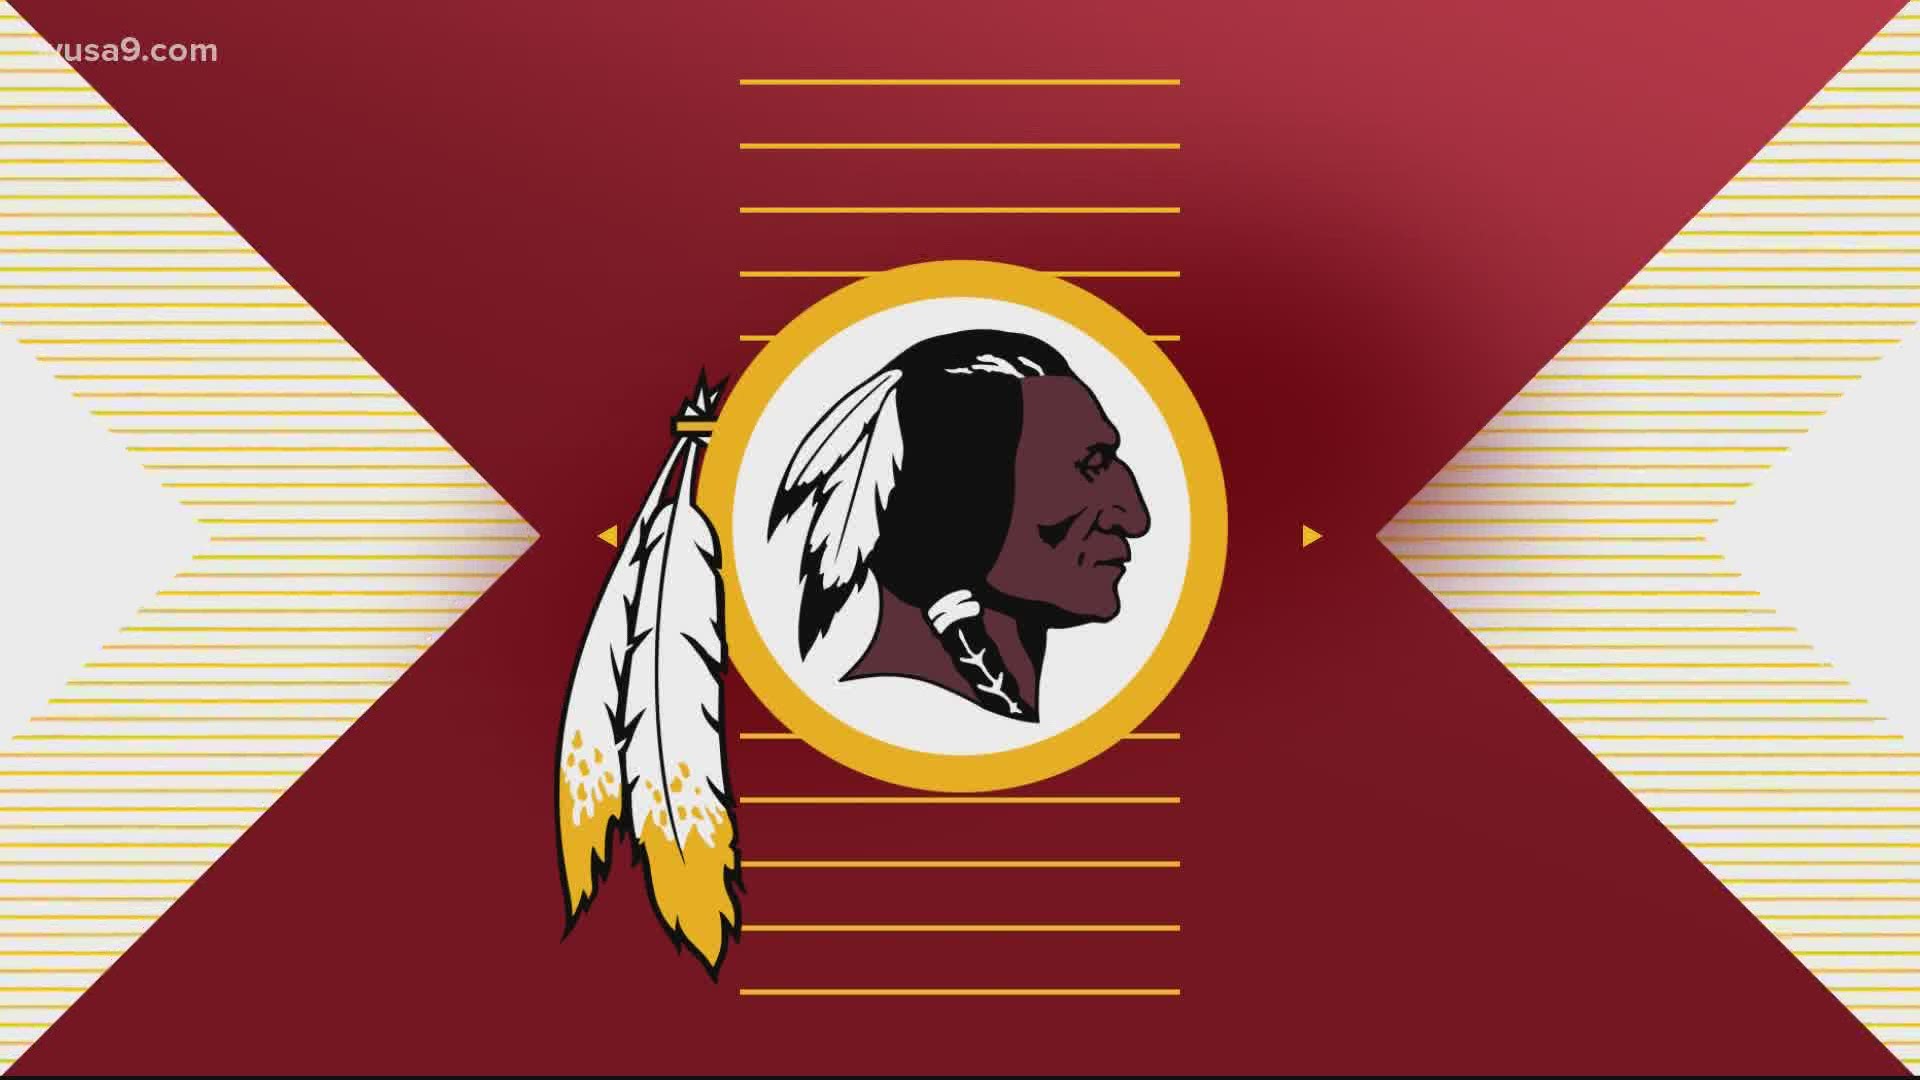 The Washington Redskins currently play at FedExField in Landover, Maryland.